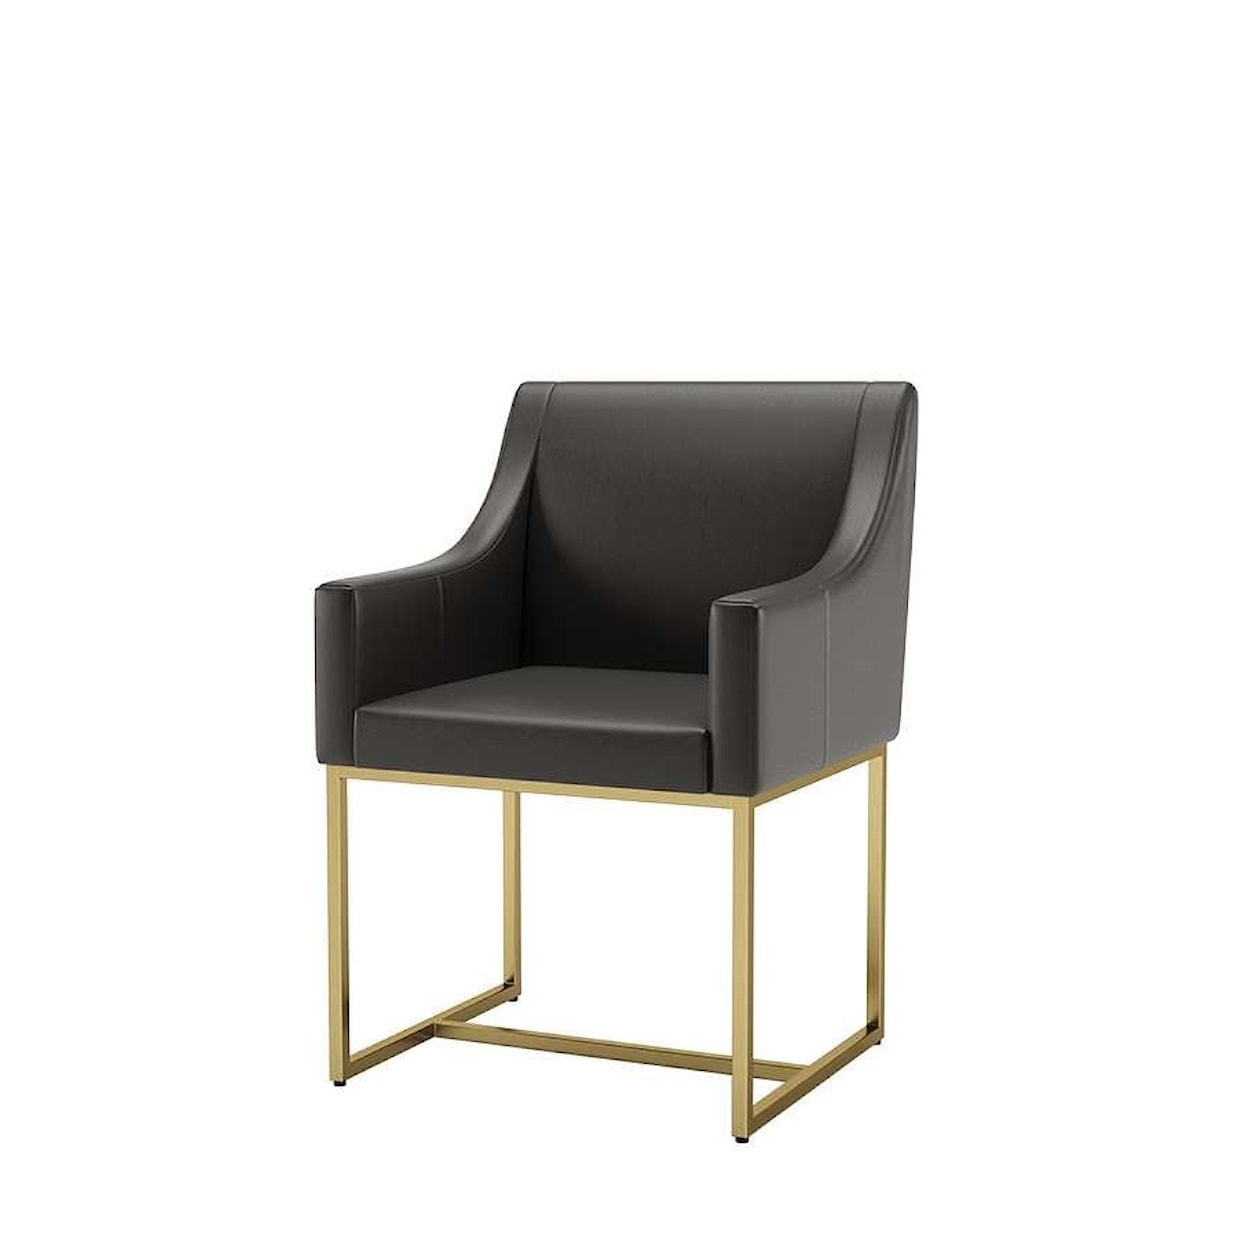 Canadel Modern Upholstered side chair